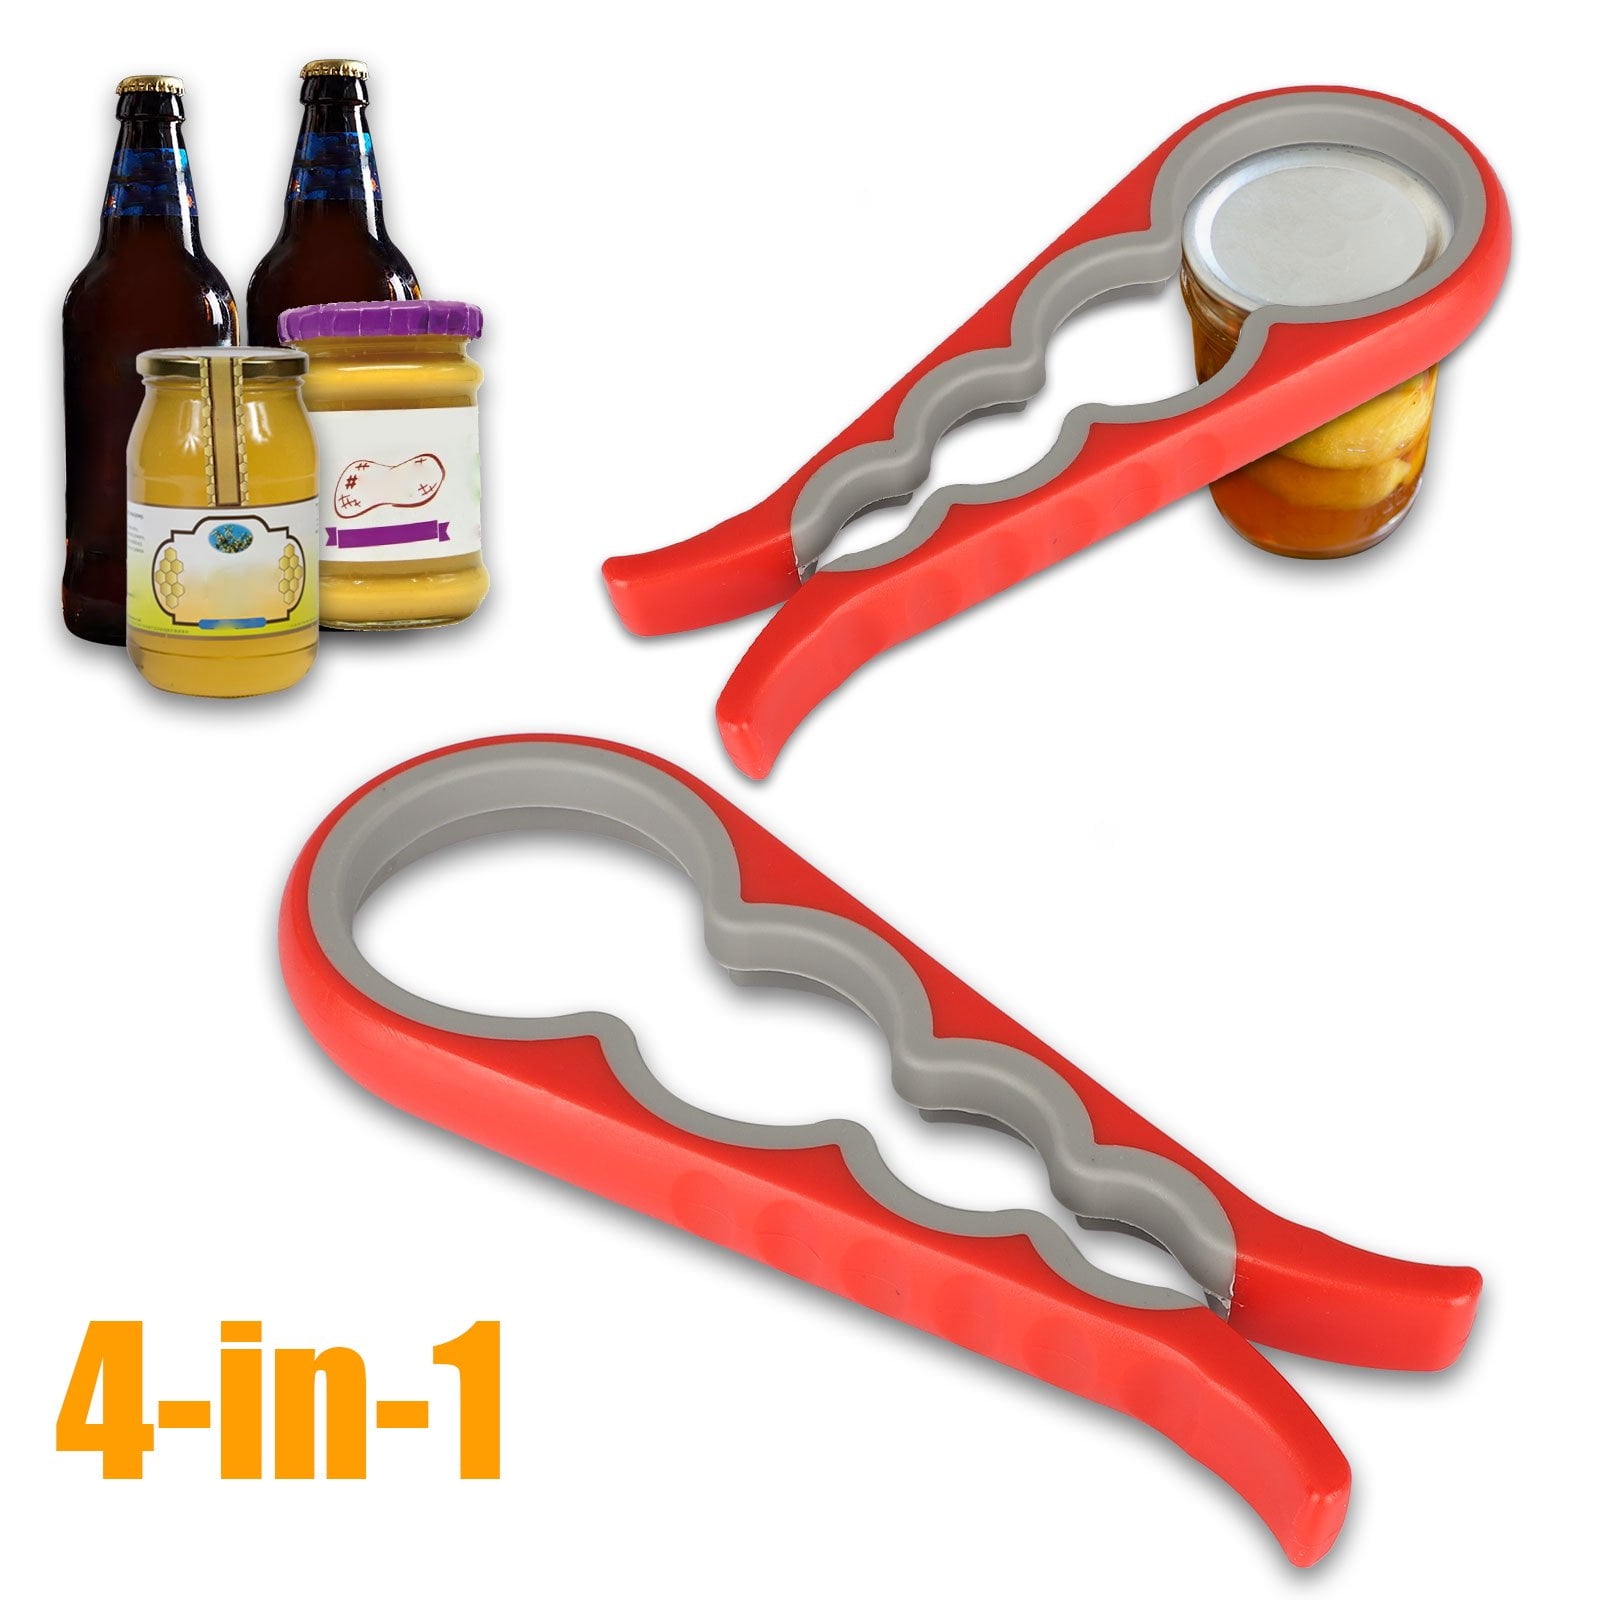 RETRO WALL HANGING WOODEN BEER BOTTLE SHAPED KITCHEN LID OPENER METAL CLAW TOOL 